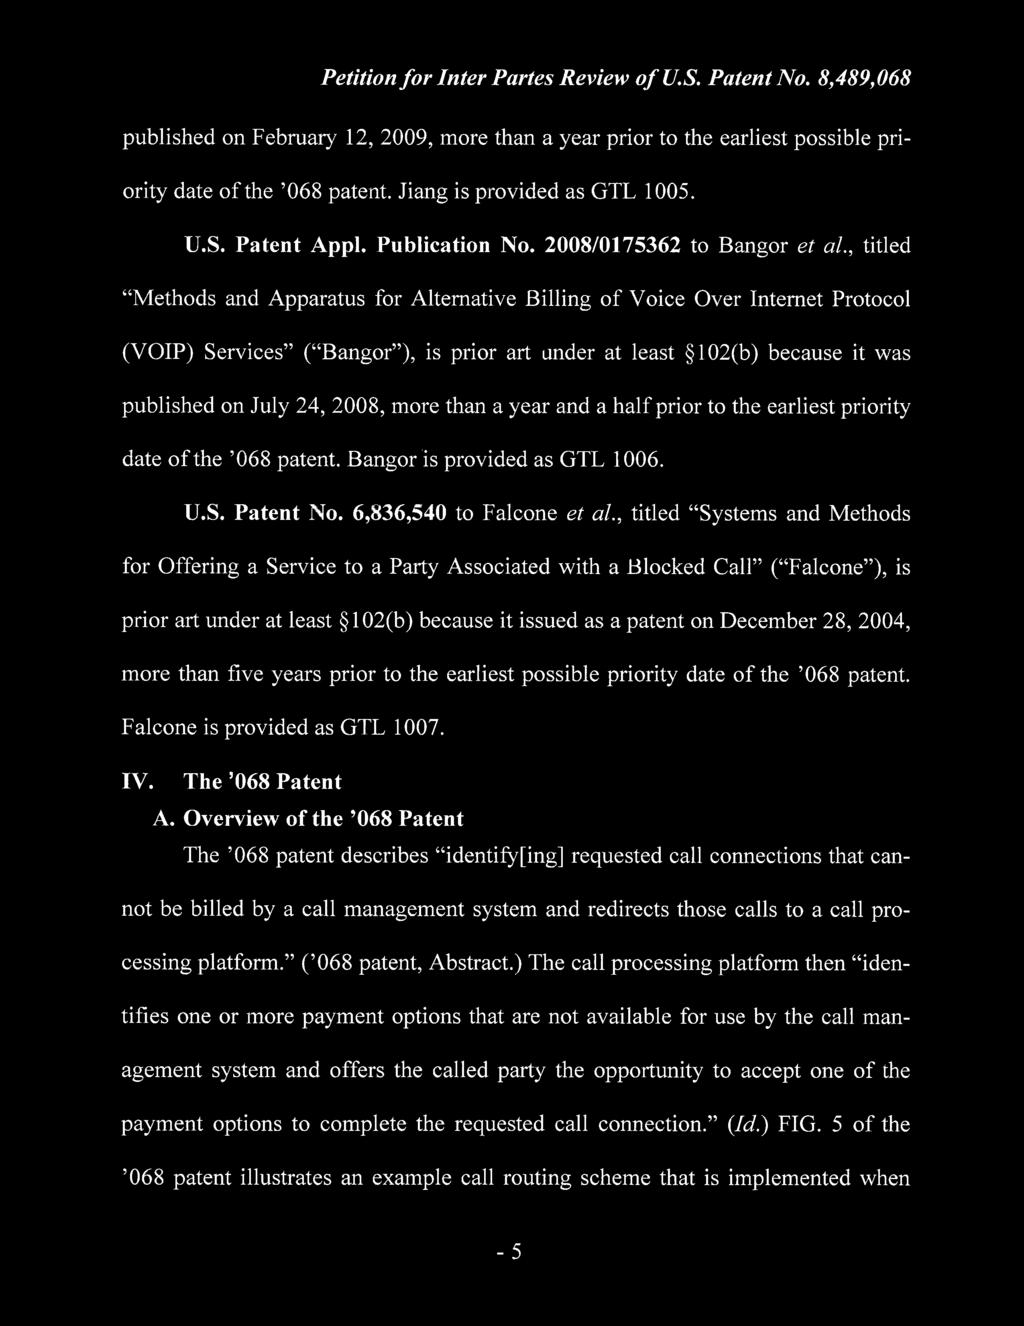 Petition for Inter Panes Review of U.S. Patent No. 8,489,068 published on February 12, 2009, more than a year prior to the earliest possible priority date of the 068 patent.